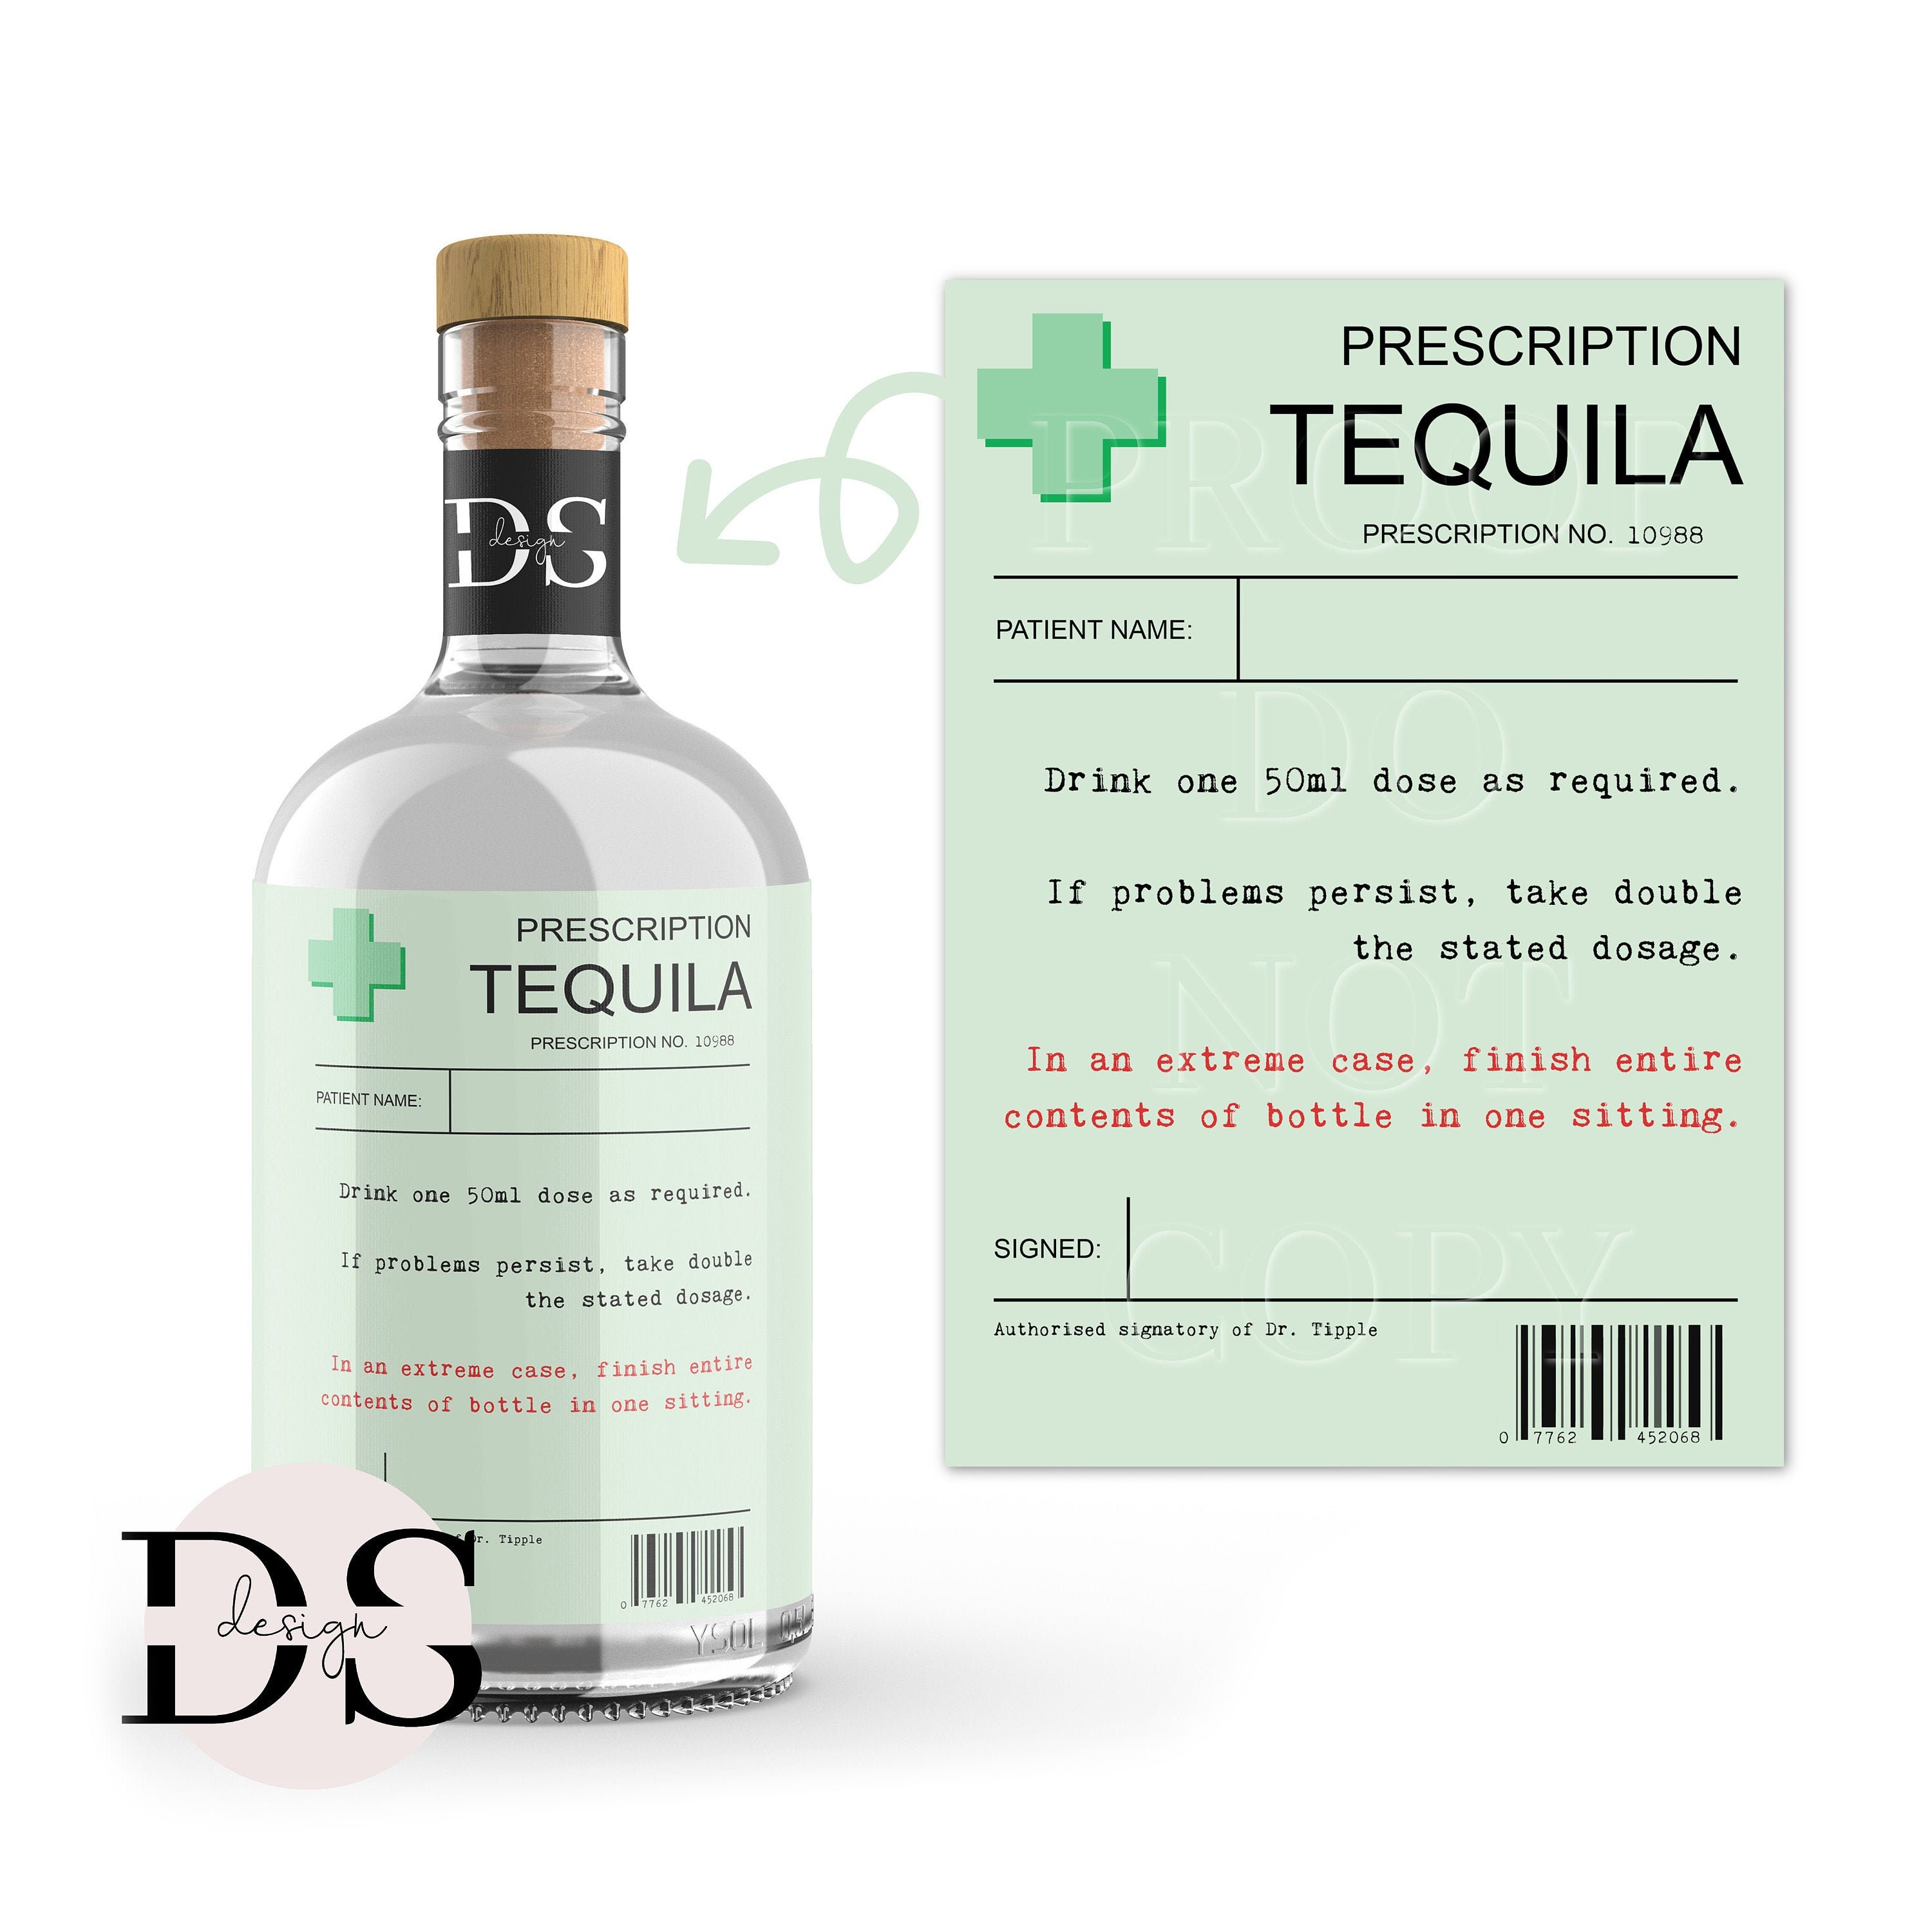 Funny Gifts – Turquoise and Tequila